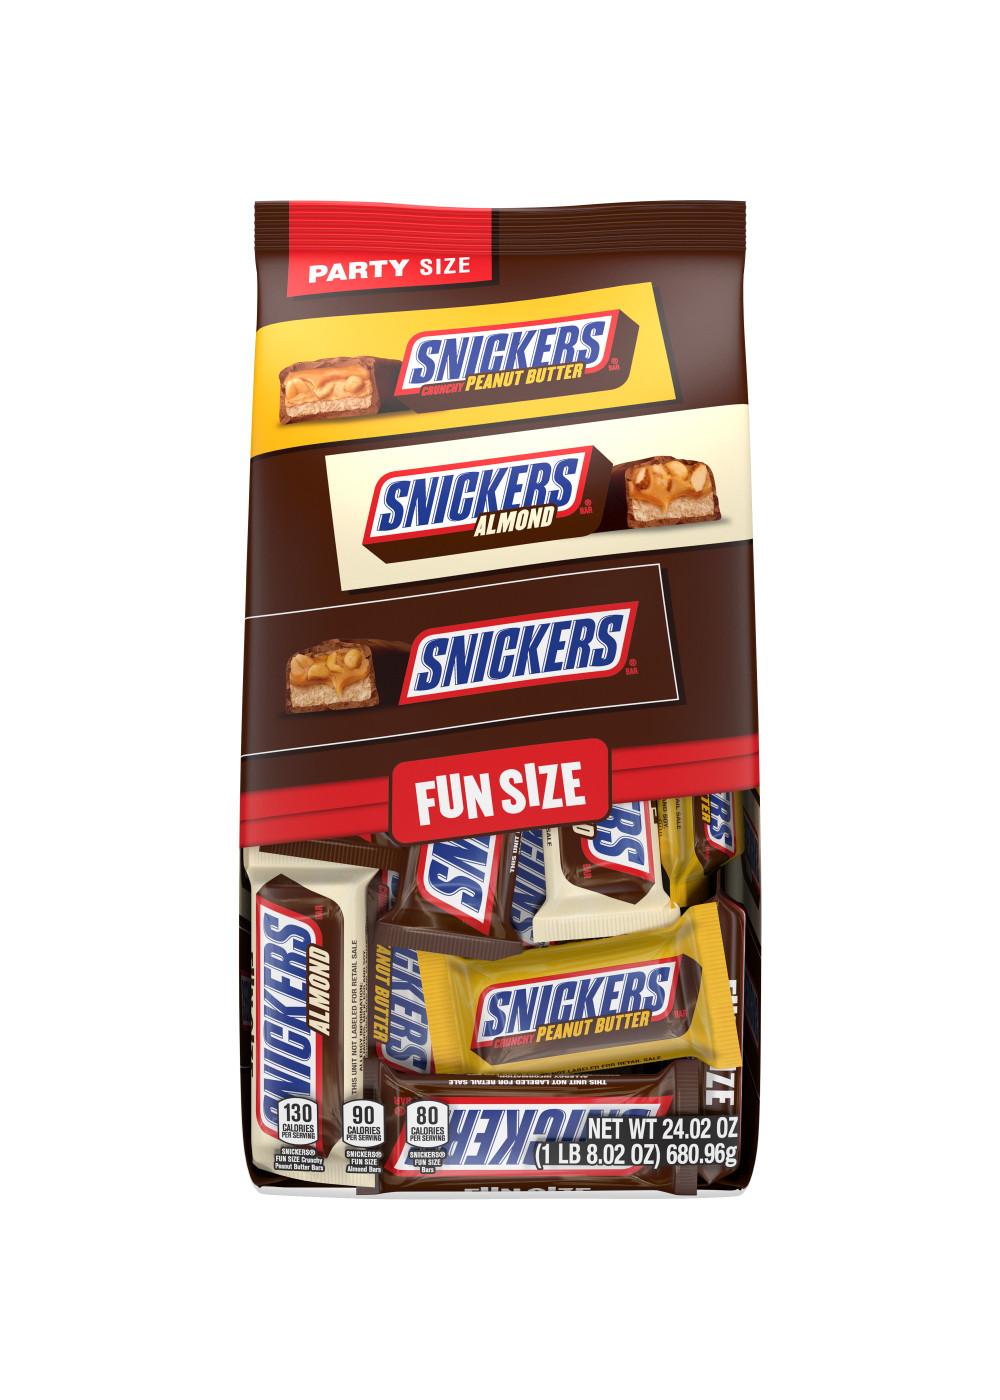 Snickers Assorted Fun Size Chocolate Candy - Party Size; image 1 of 7